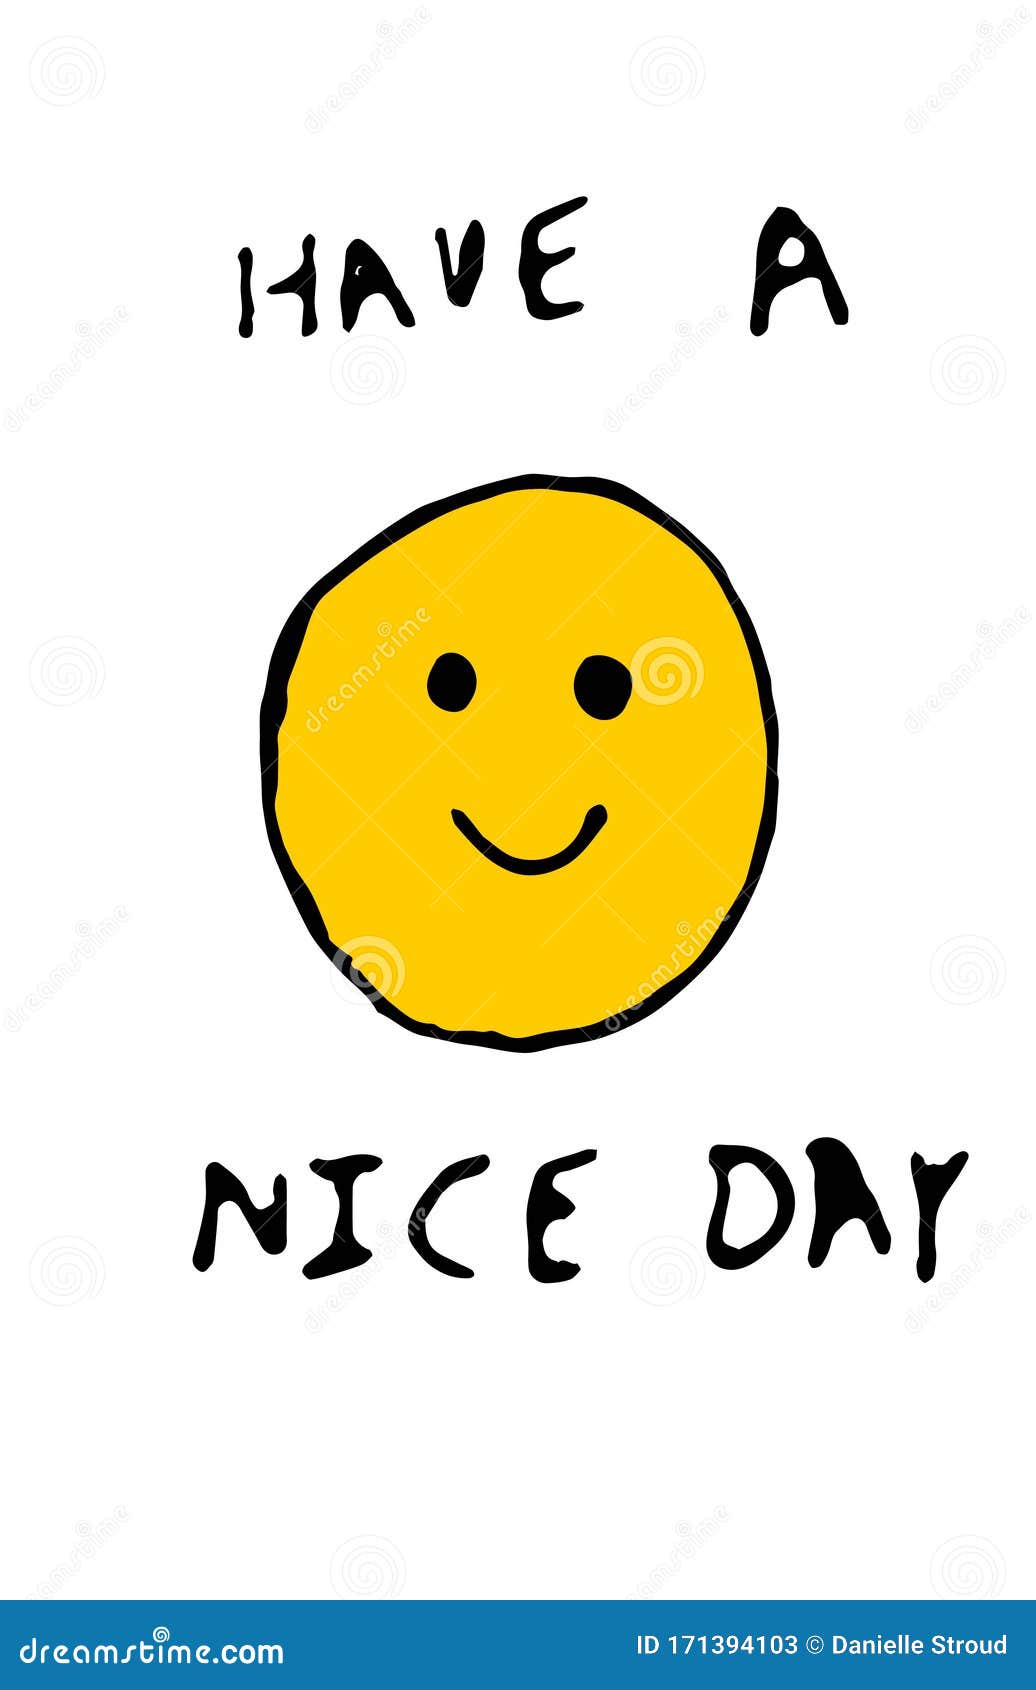 Have a Nice Day stock illustration. Illustration of face - 171394103